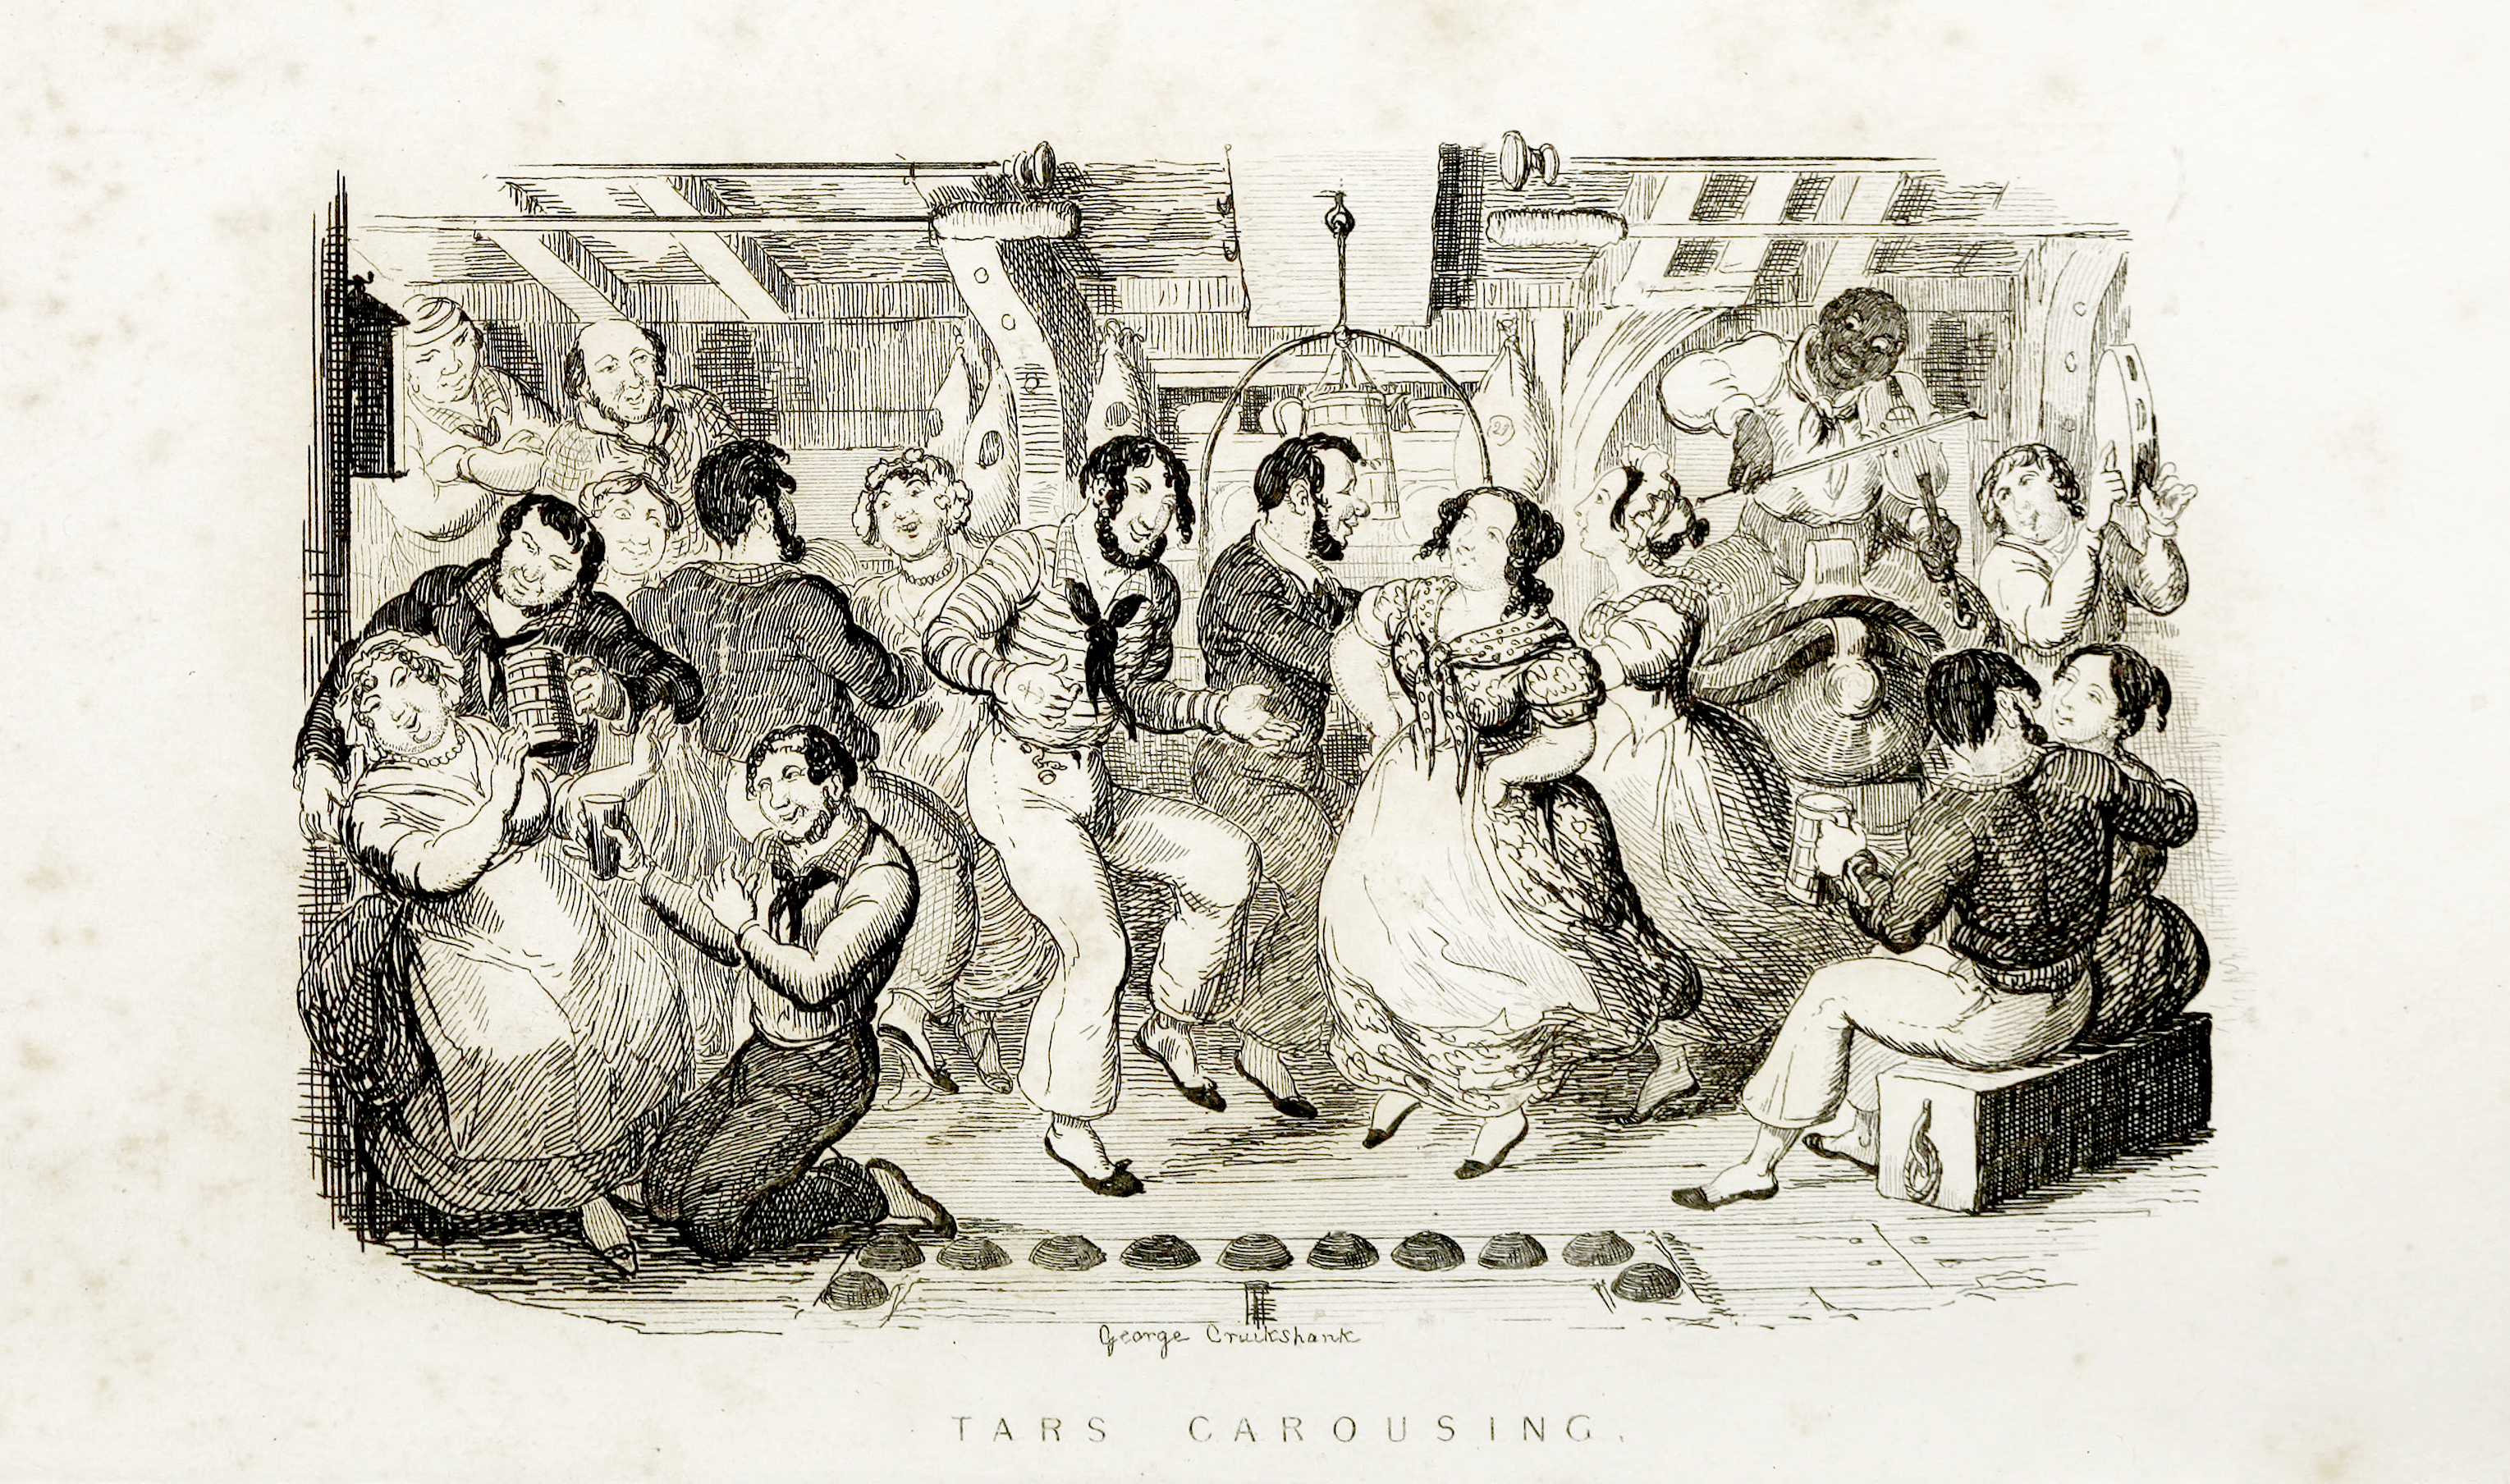 Illustration by G Cruikshank, from Songs of the Late Charles Dibdin, 1841, showing life between decks and the recreational singing of ‘fo’c’sle shanties’